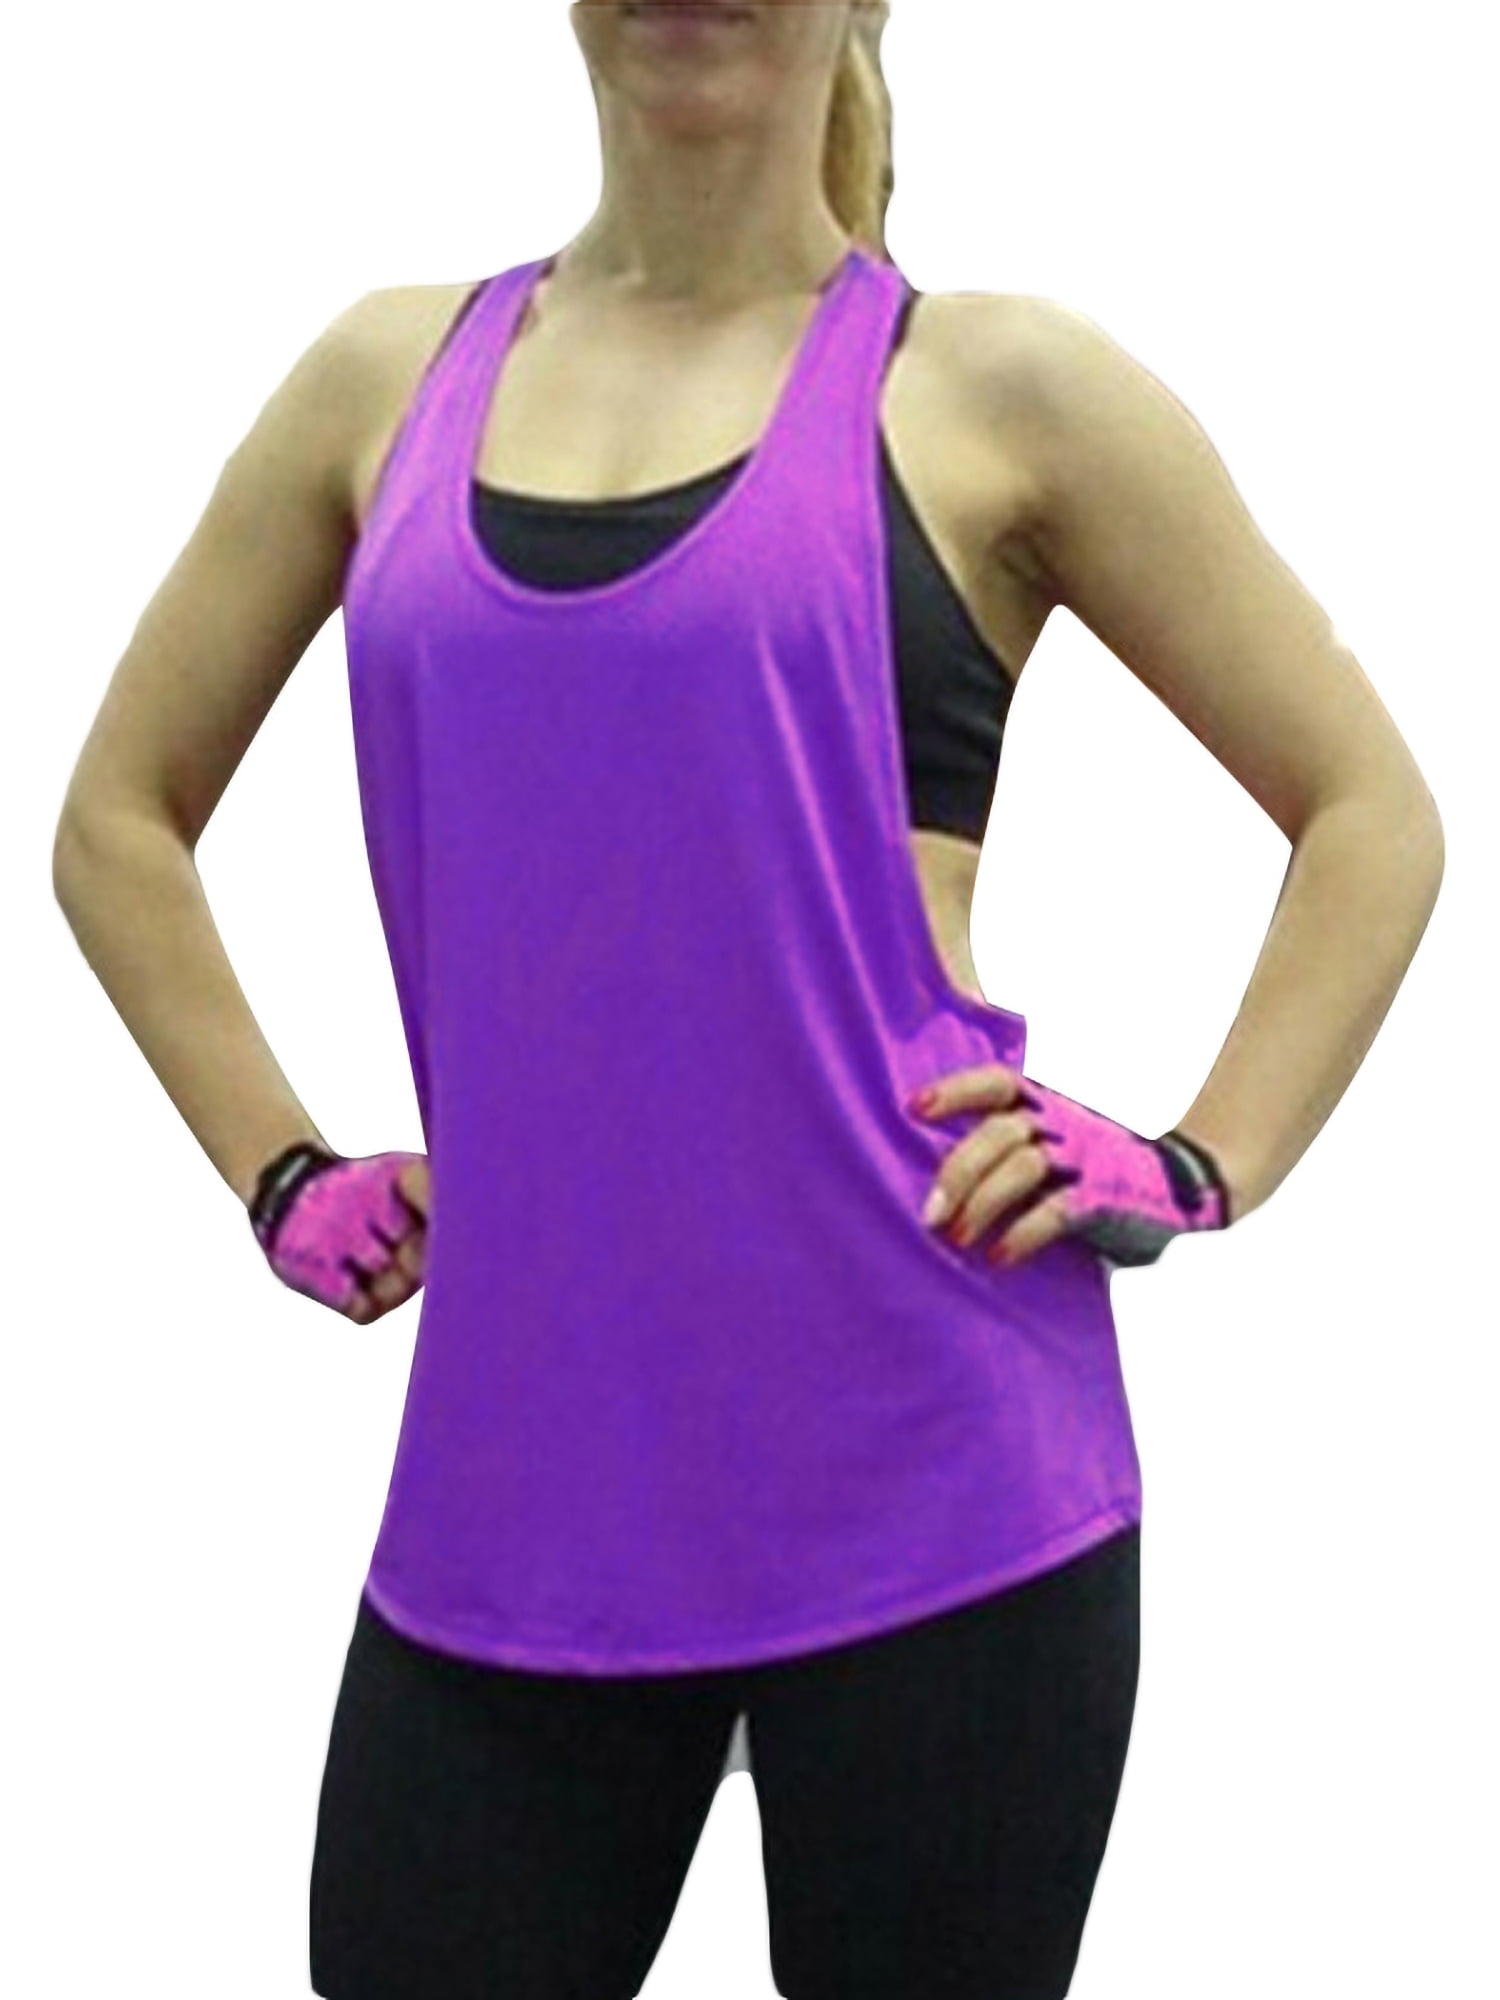 siilsaa Workout Tops for Women Loose Fit Raceback Backless Workout Shirts Sleeveless Muscle Tank Tops Athletic Gym Yoga Tops 